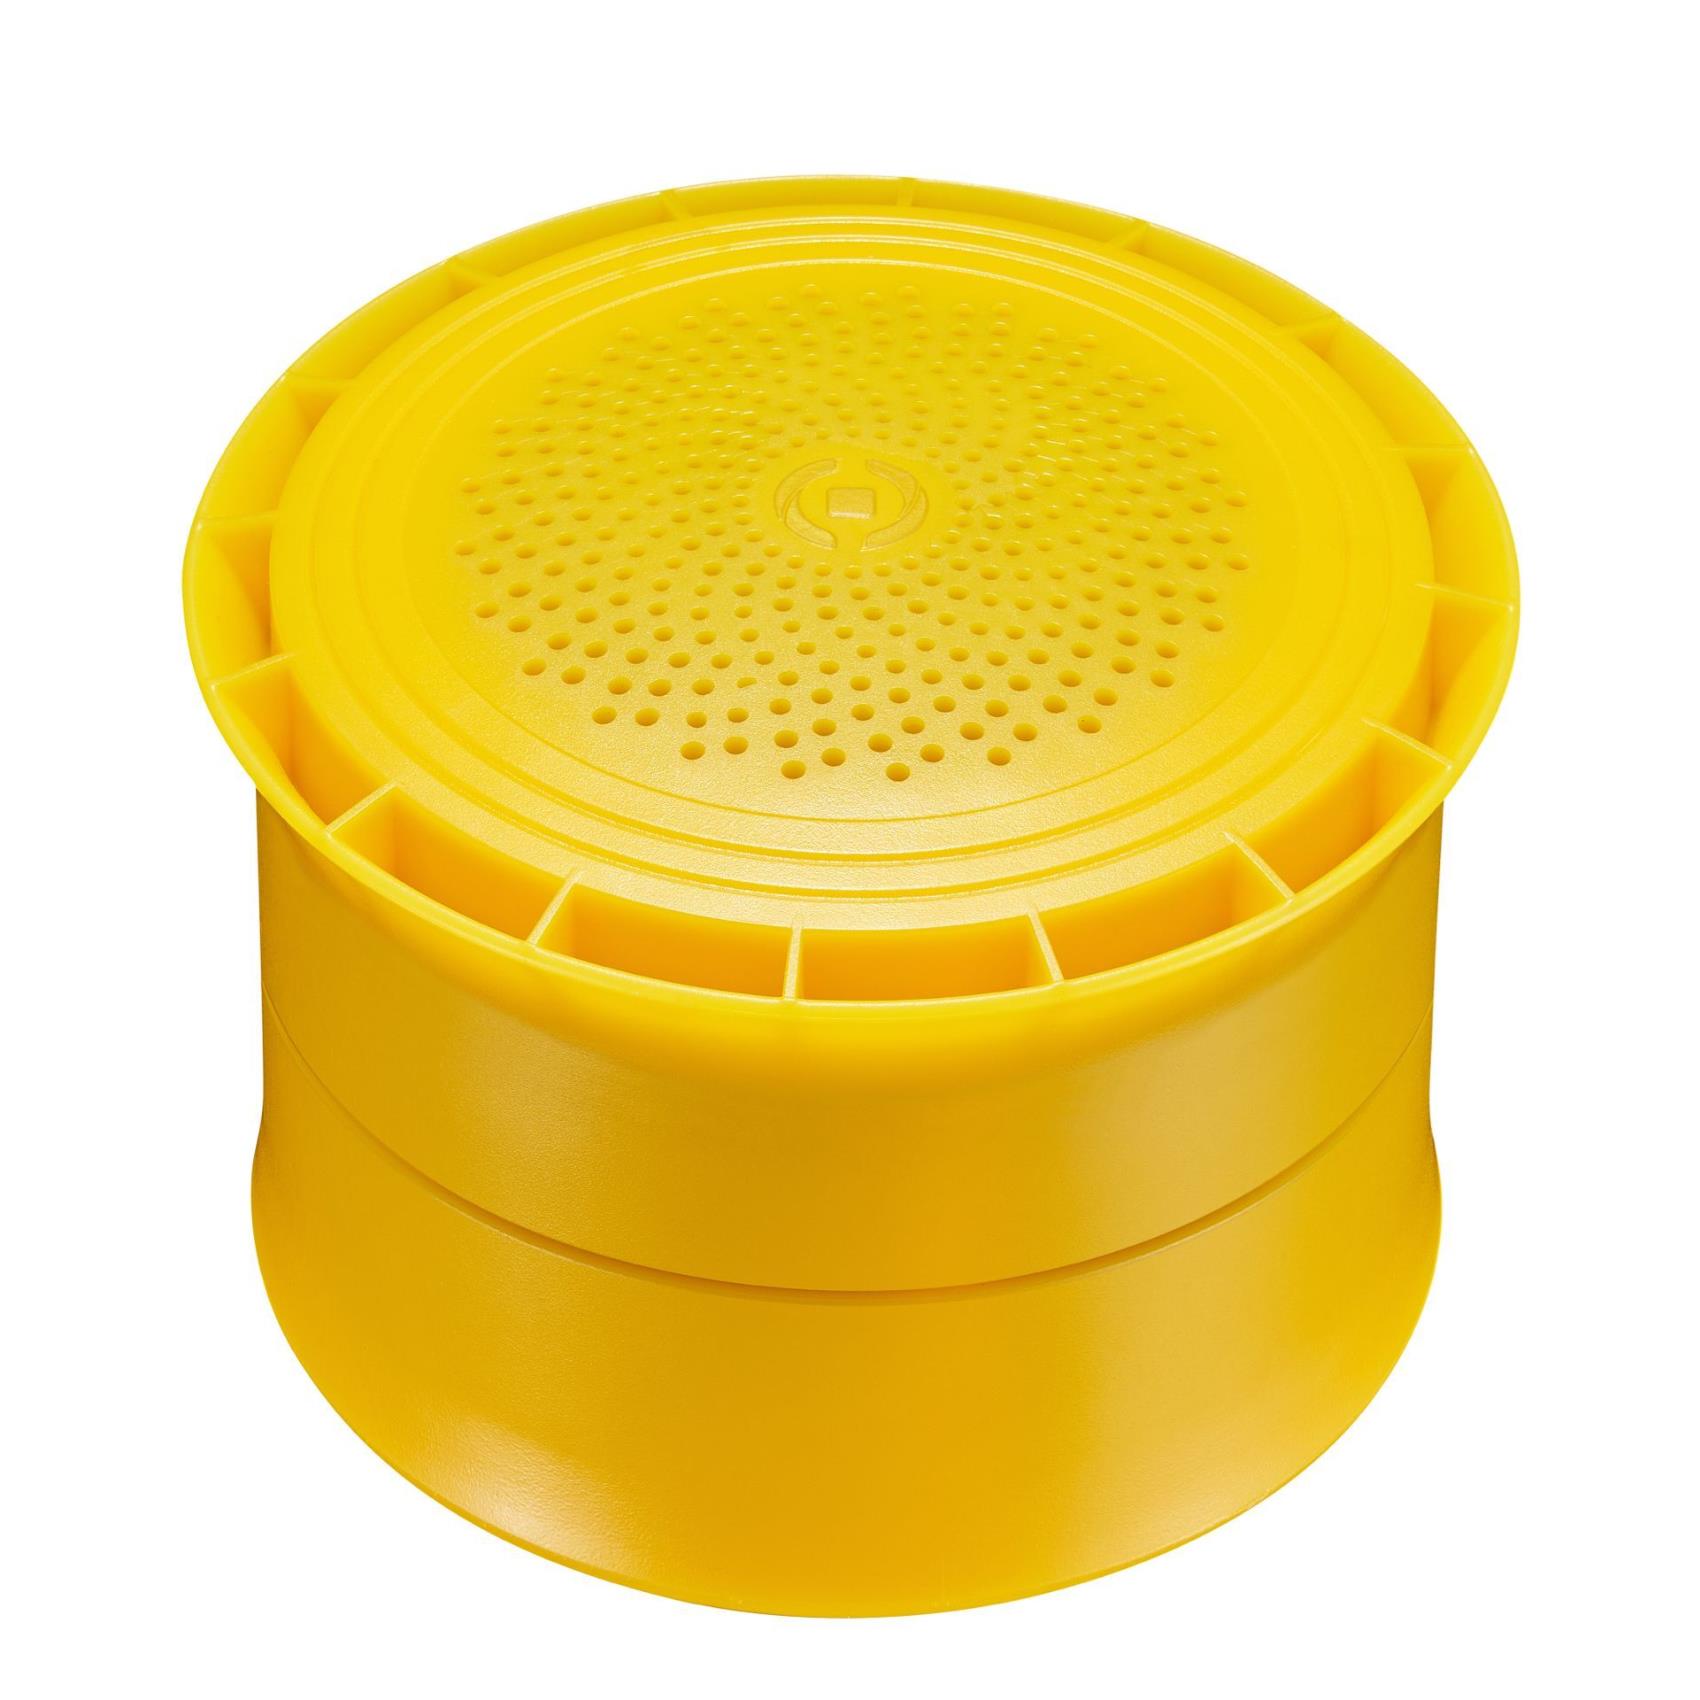 Pool Speaker 3w Parrot Celly Poolparrot 8021735189169